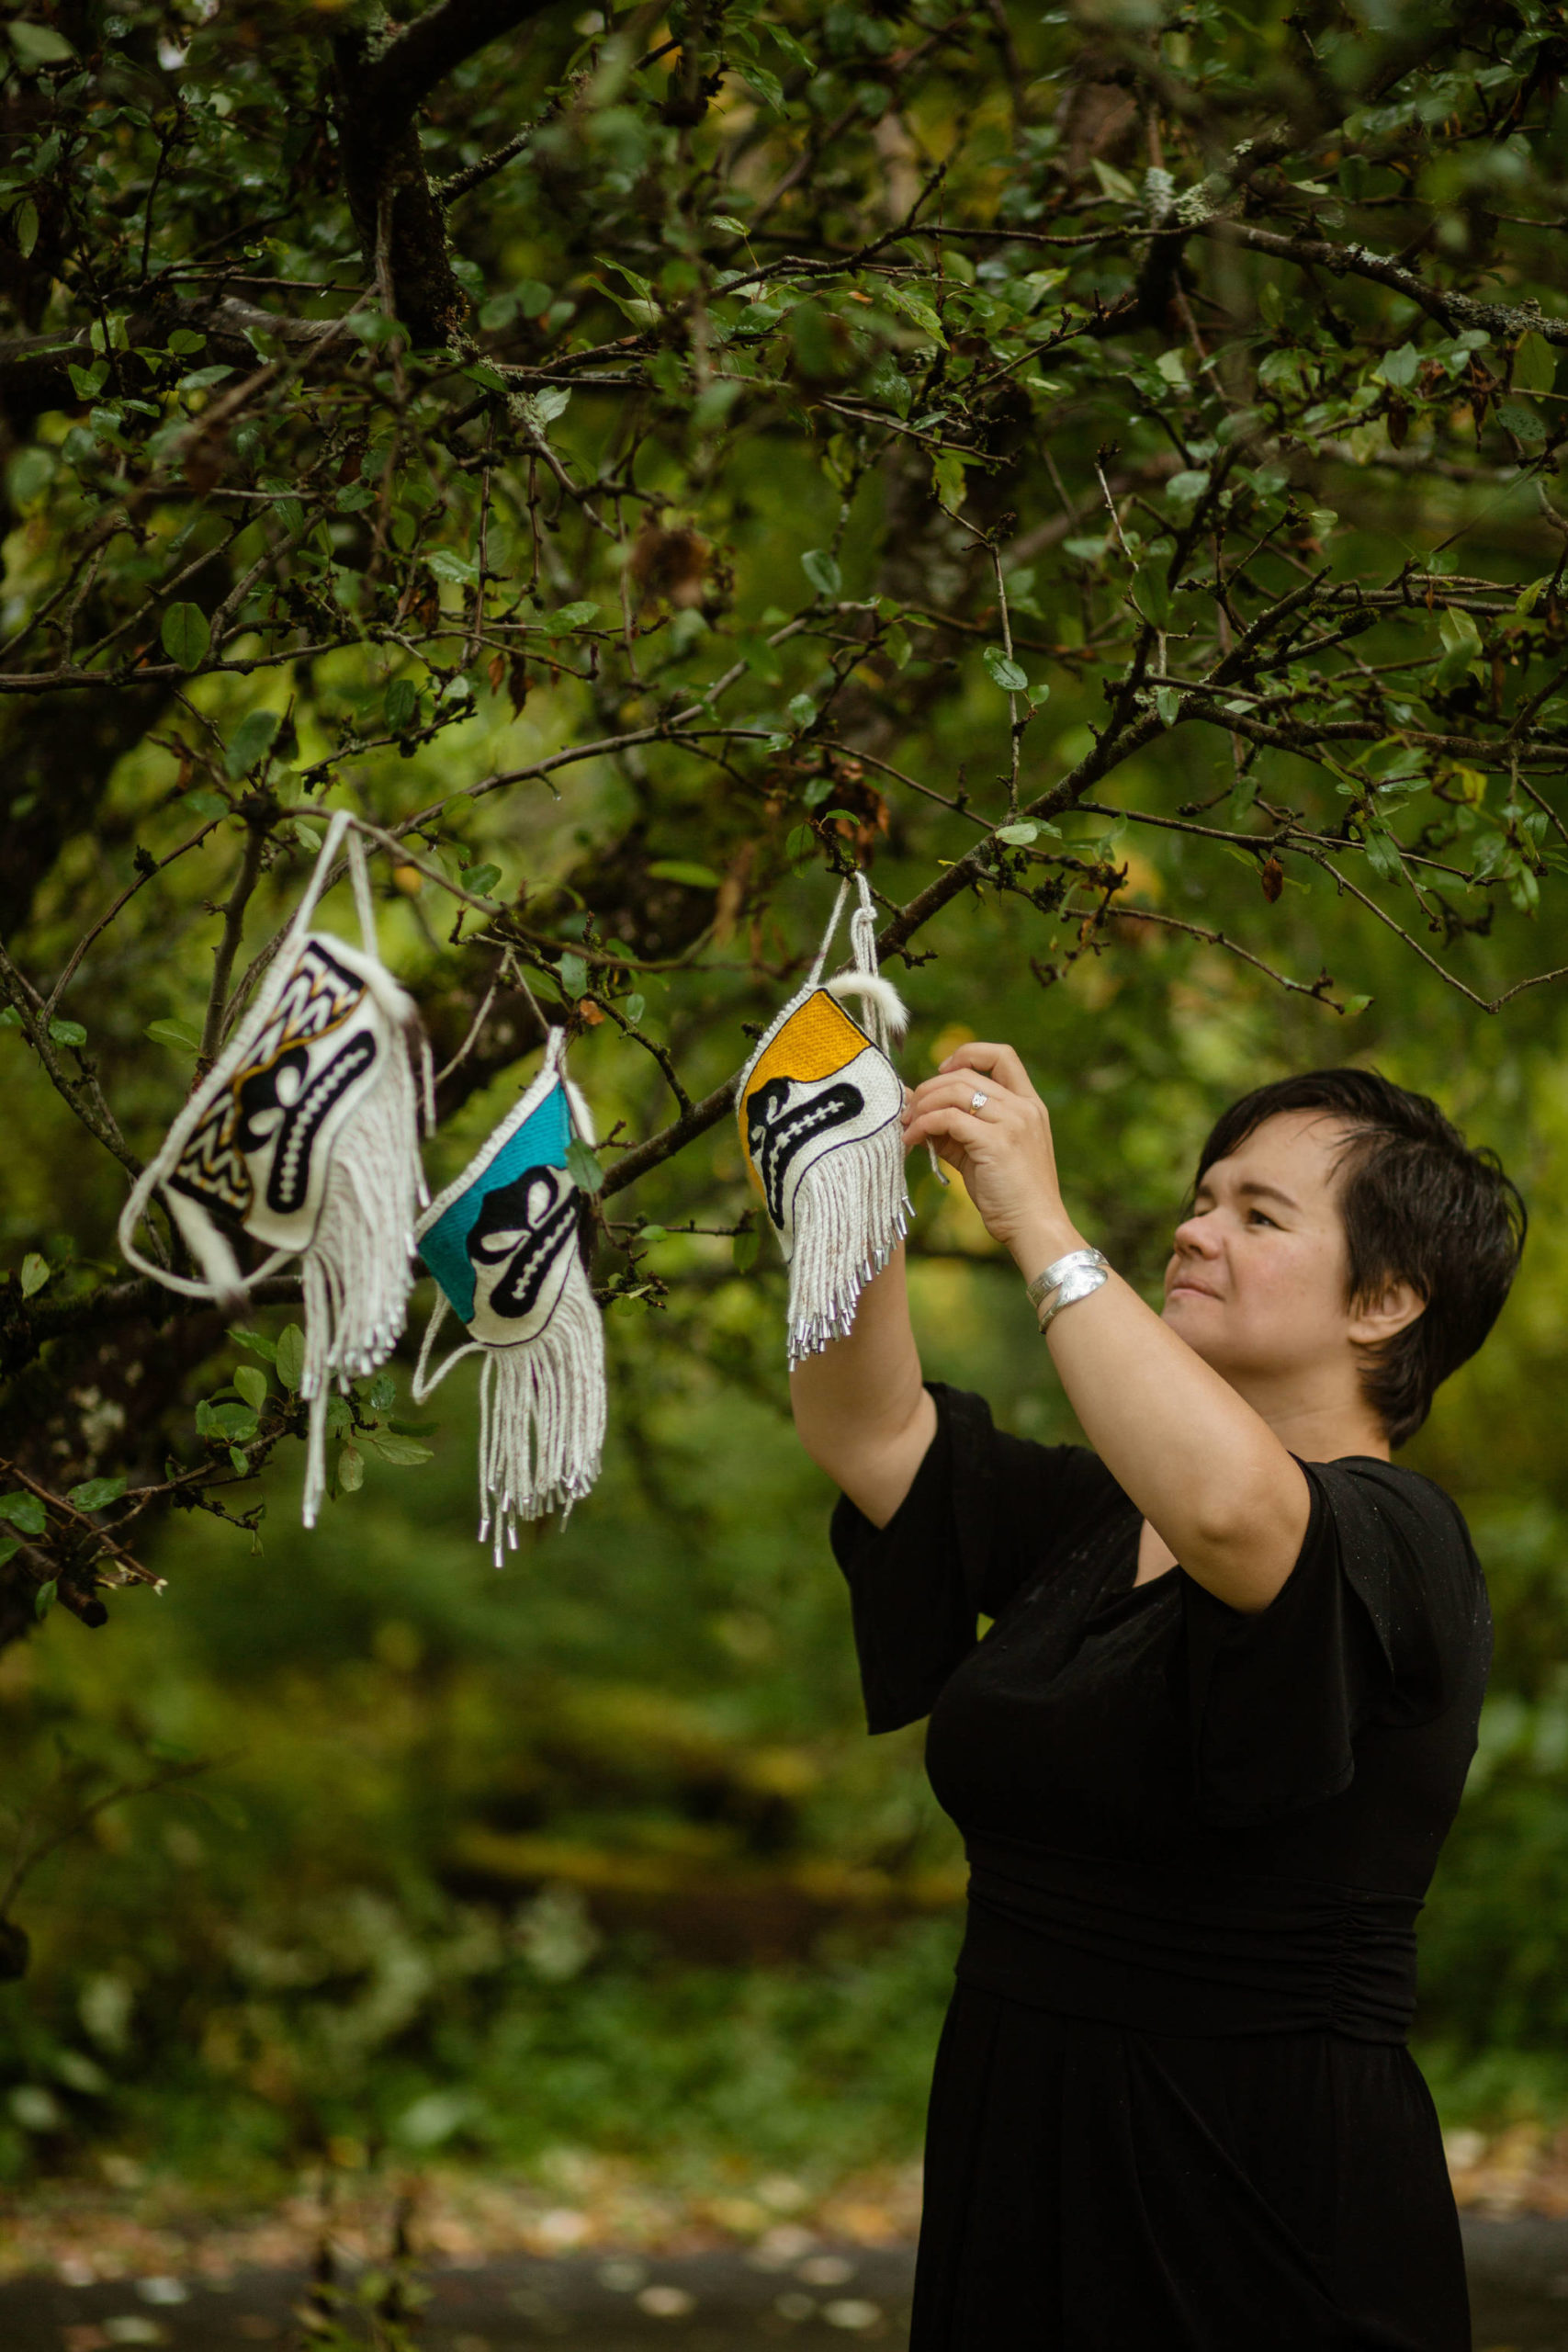 Traditional artist Lily Hope, shown here is recognized as this edition of Tidal Echoes’ featured artist for her work in Ravenstail and Chilkat weaving, particularly her Chilkat Protector masks, shown here hanging.
Courtesy photo / @SydneyAkagiPhotography